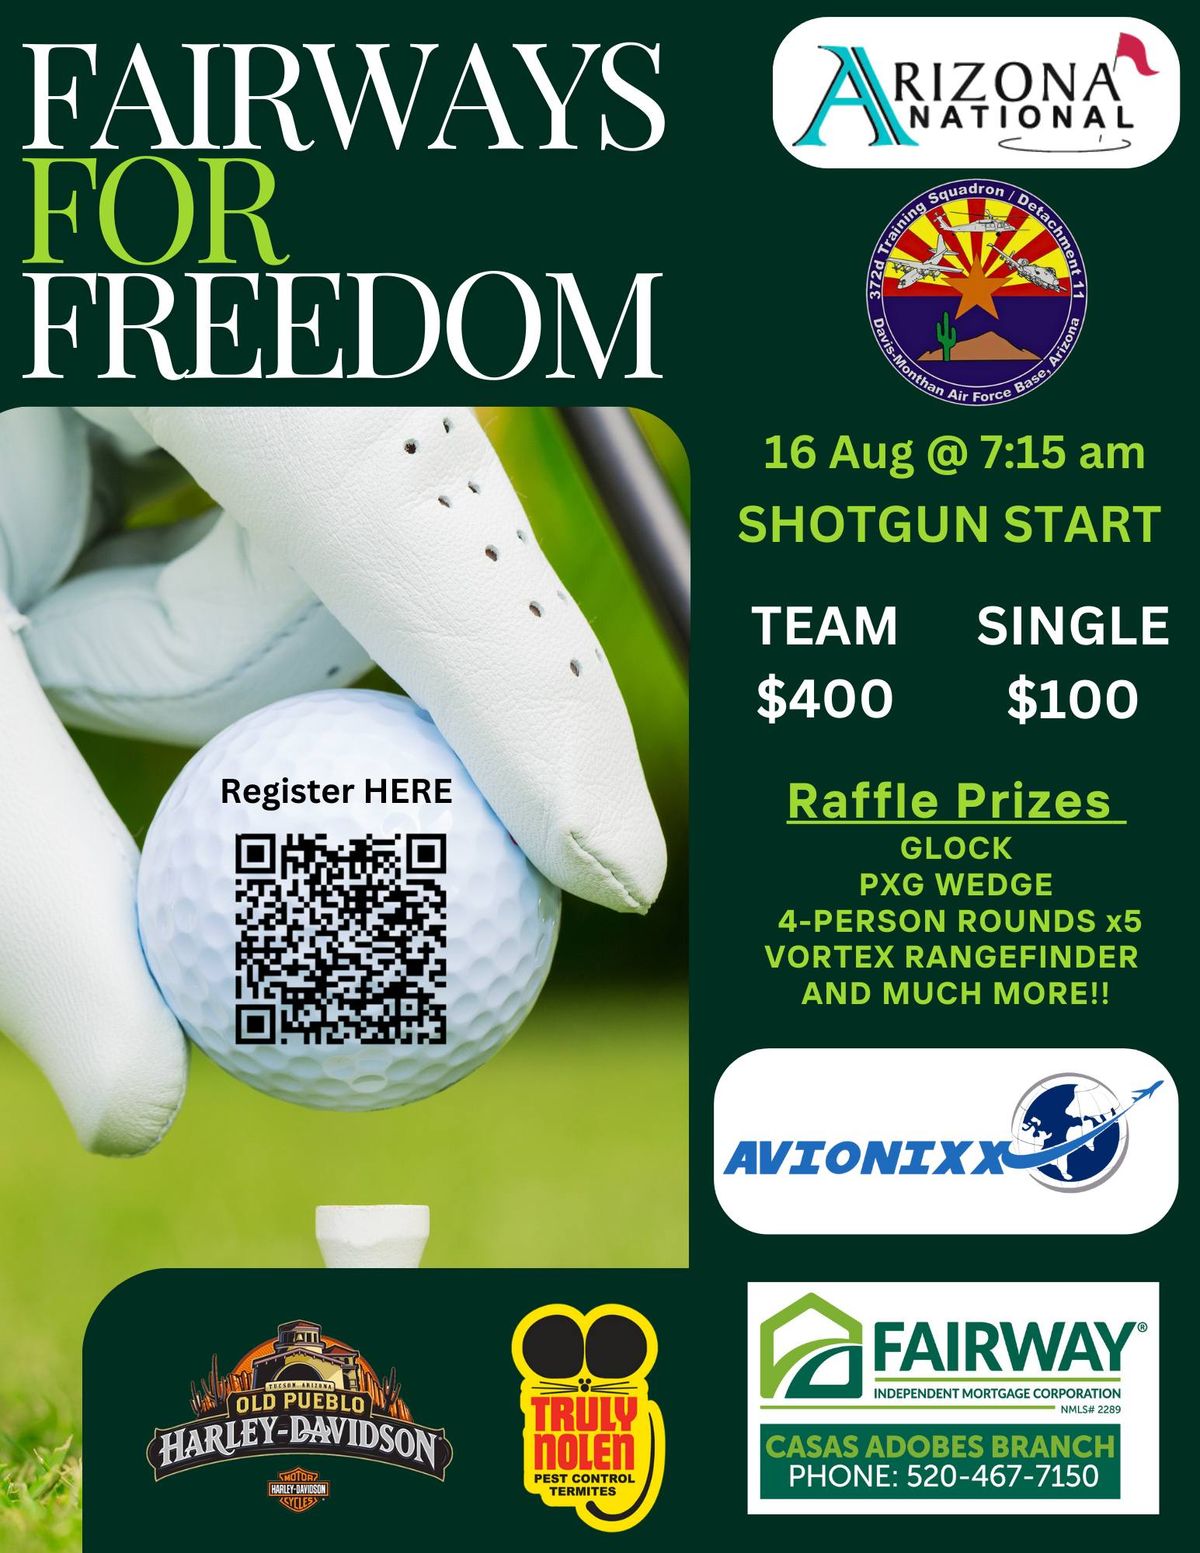 2nd Annual Fairway's for Freedom tournament